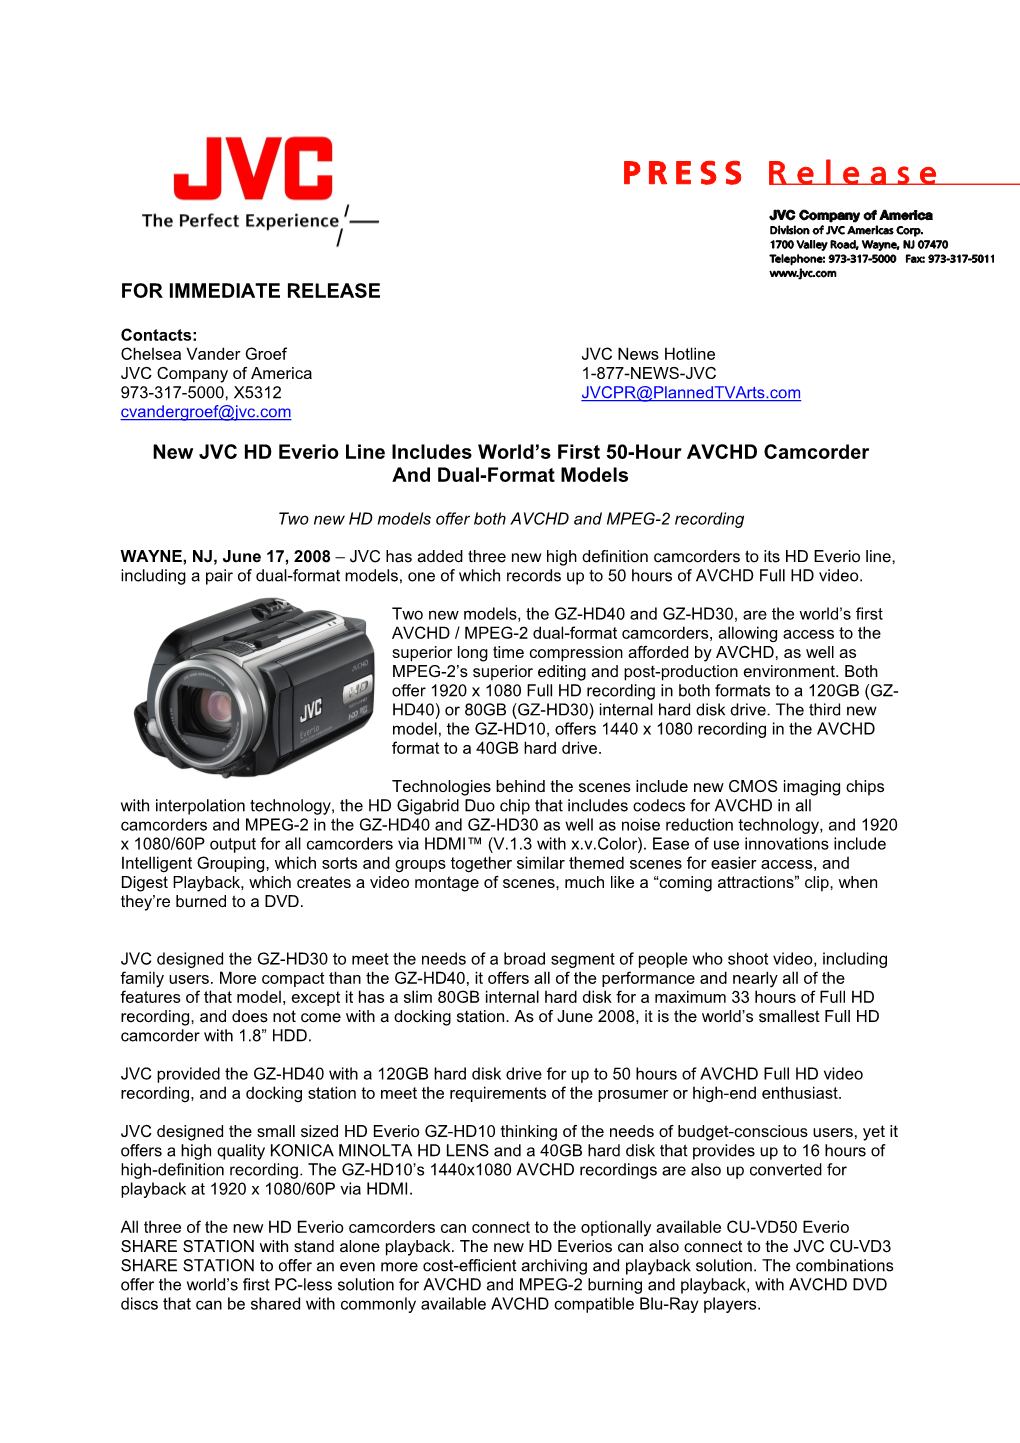 FOR IMMEDIATE RELEASE New JVC HD Everio Line Includes World's First 50-Hour AVCHD Camcorder and Dual-Format Models